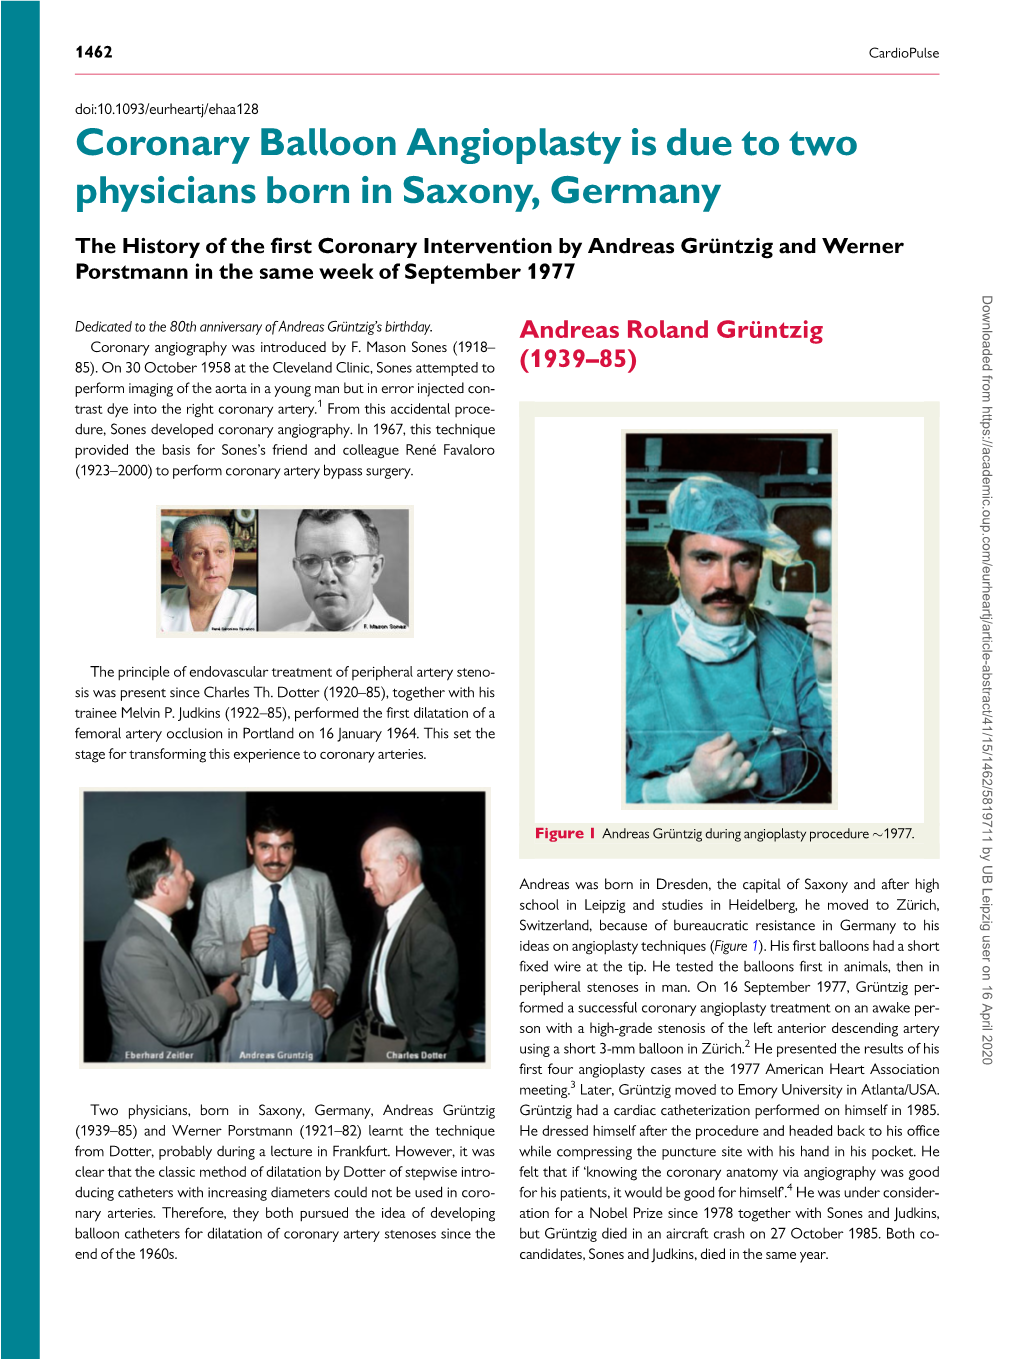 Coronary Balloon Angioplasty Is Due to Two Physicians Born in Saxony, Germany